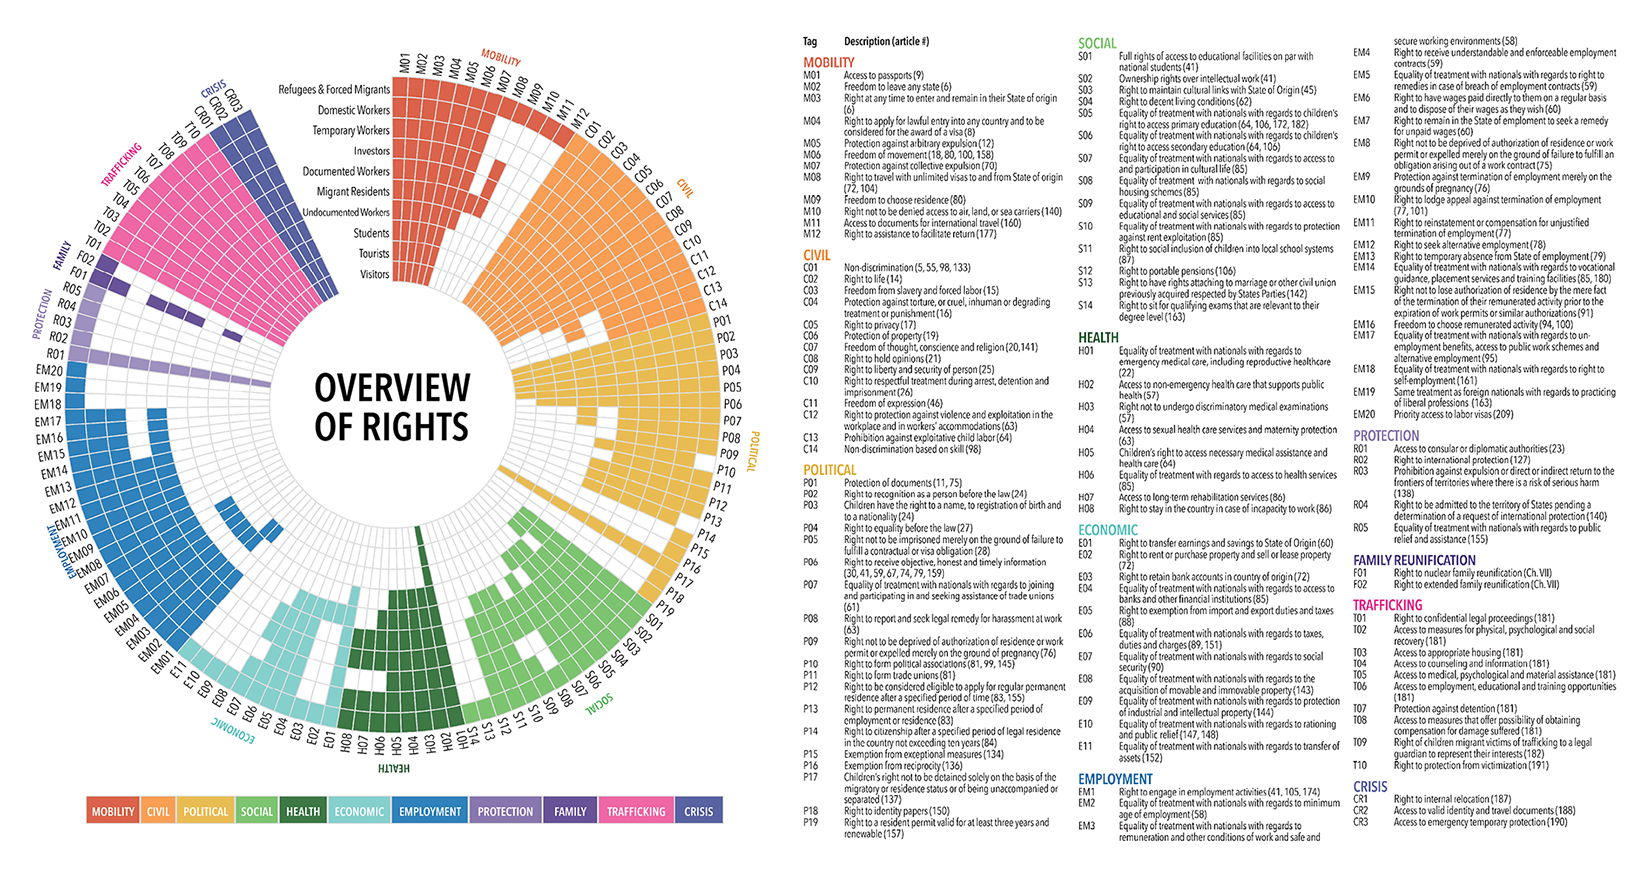 Model International Mobility Convention Overview of Rights visualization